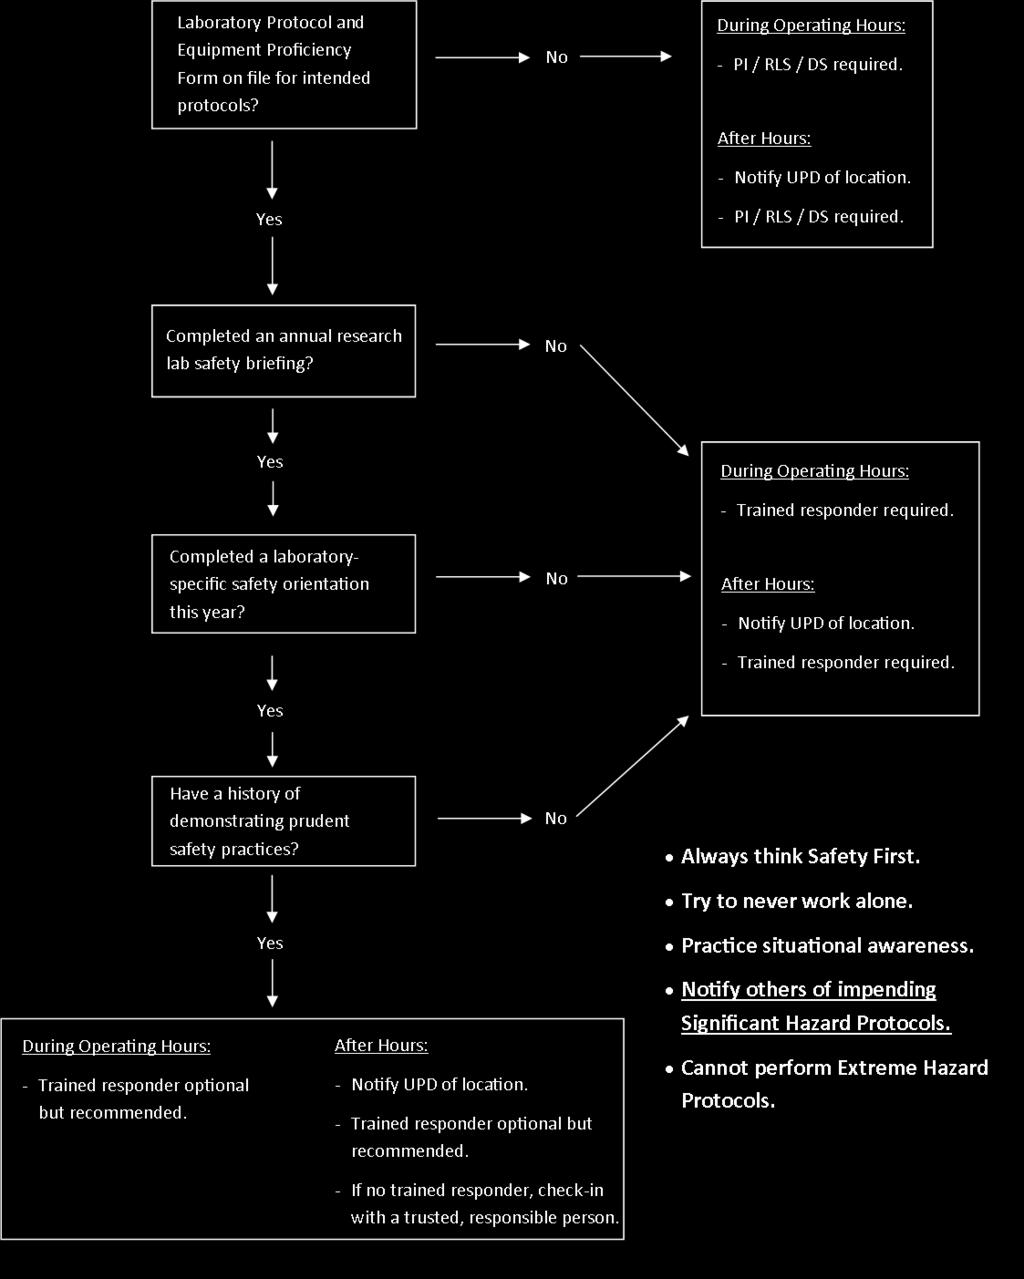 12 Appendix D - Flow Chart for Post-doc Research Fellows and